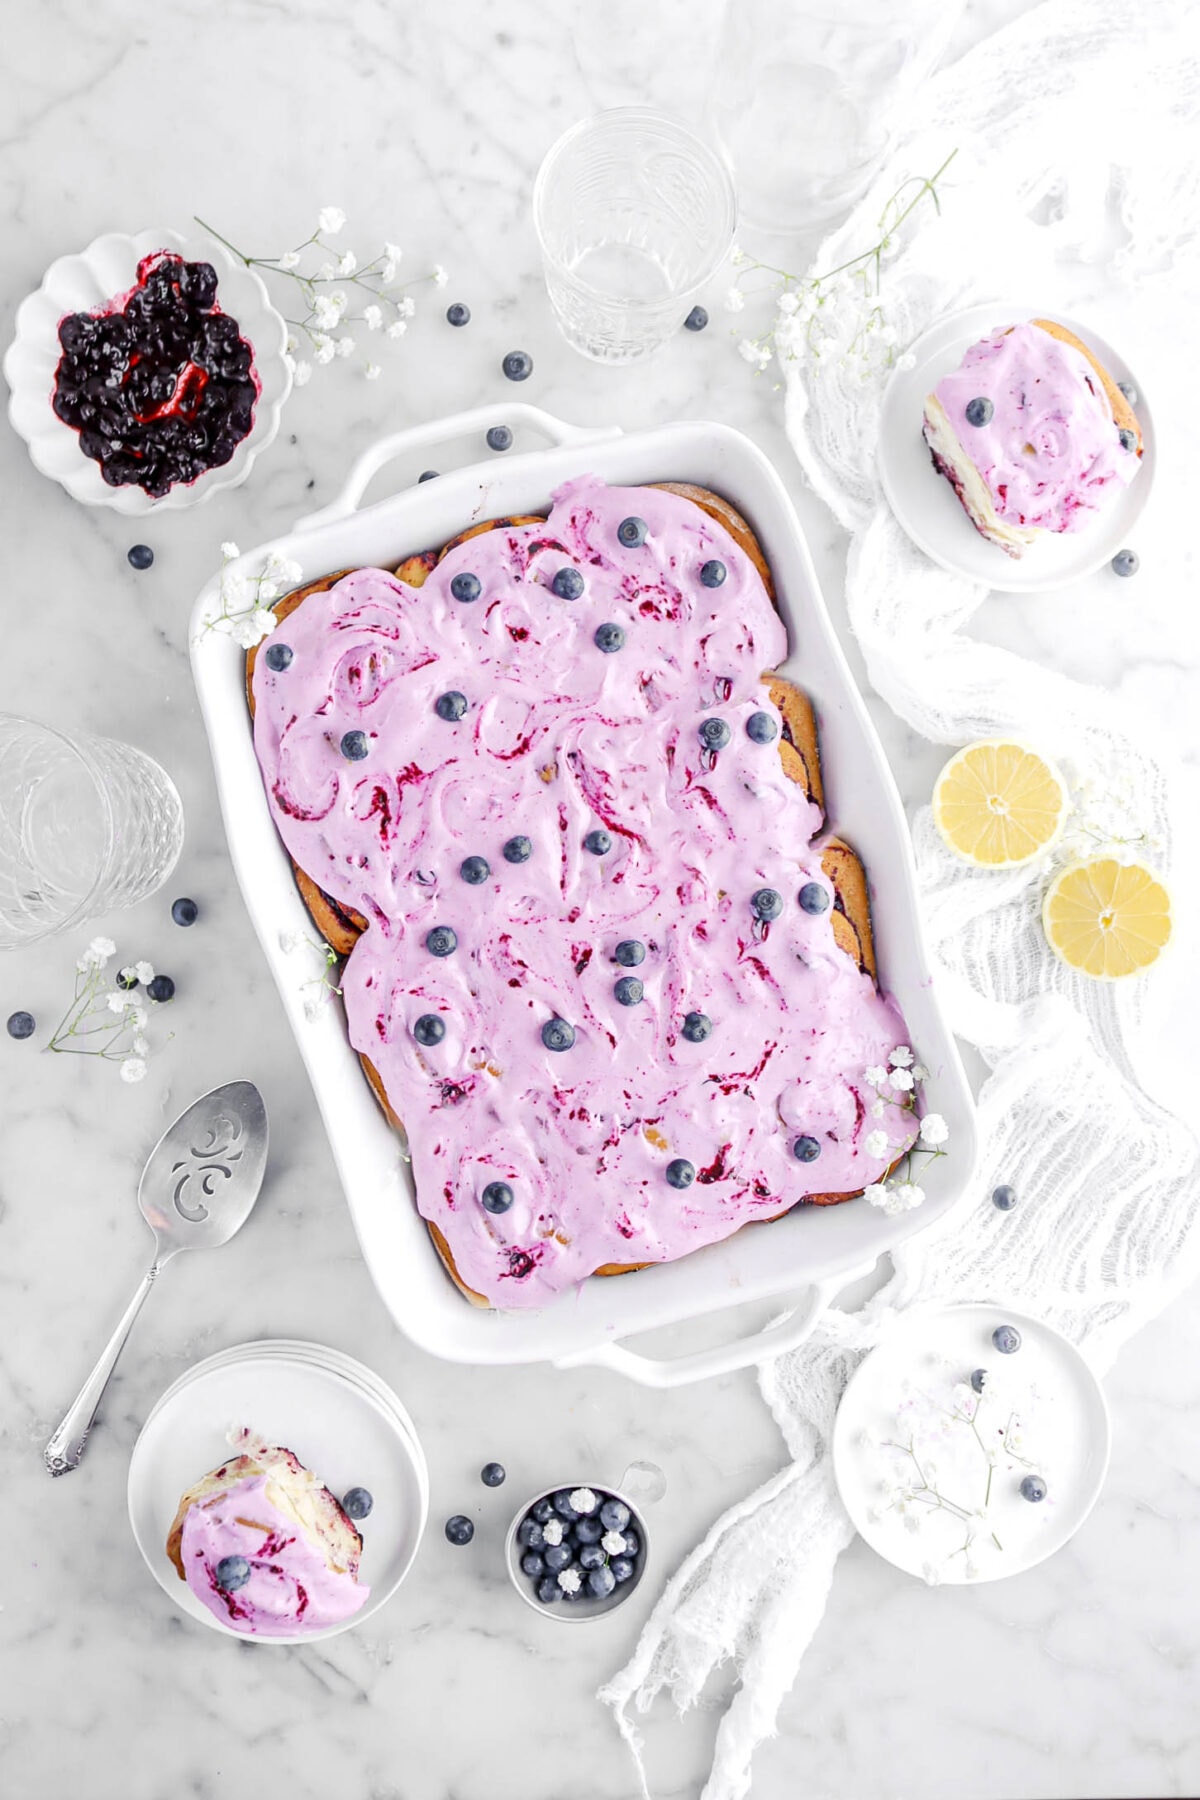 overhead shot of lemon blueberry rolls in white casserole with two extra rolls on white plates beside casserole with blueberries, two lemon halves, and white flowers around.